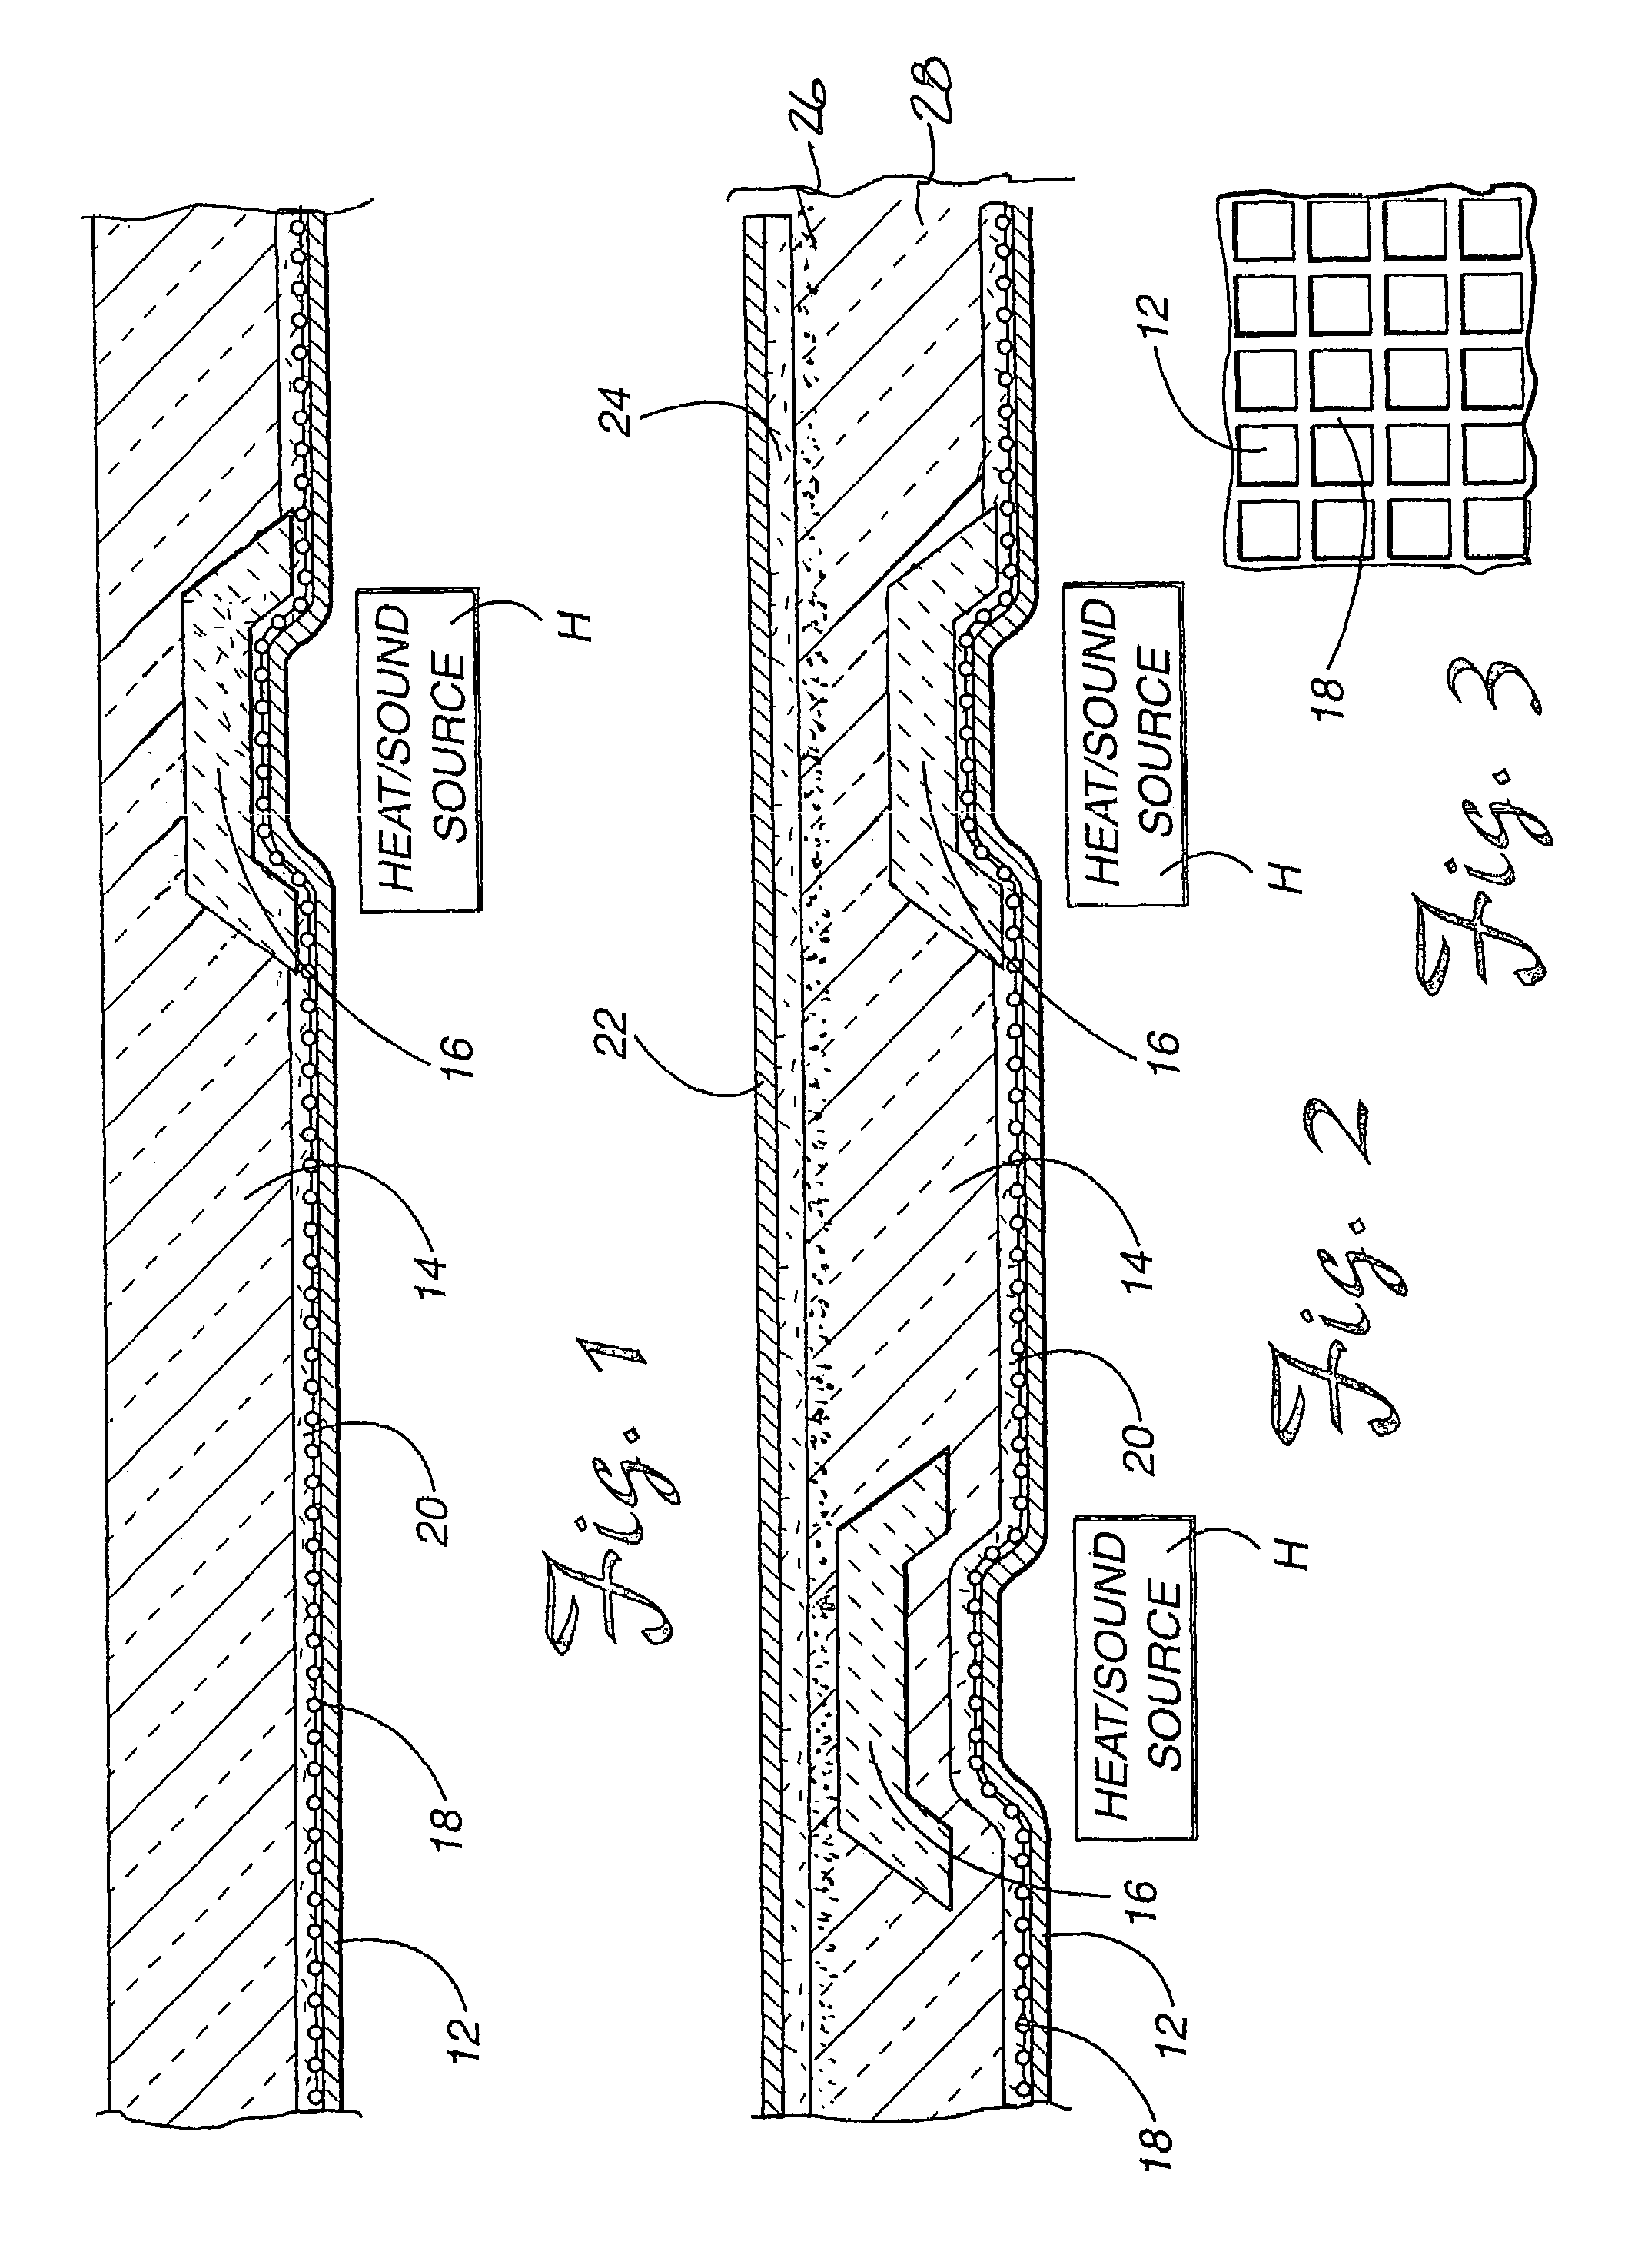 Acoustical and thermal insulator